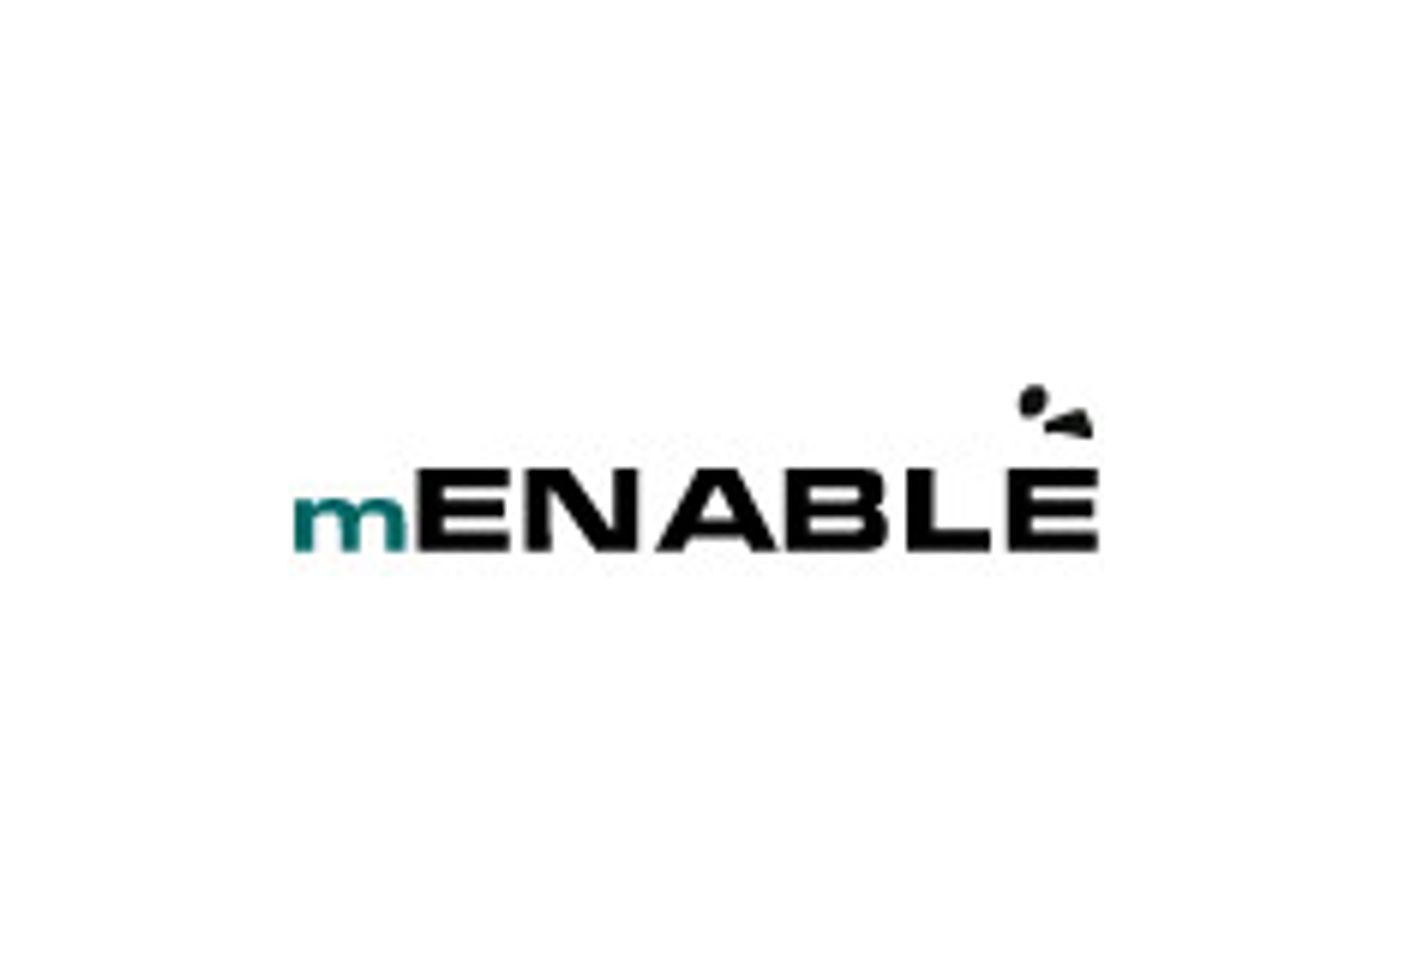 mENABLE Goes Live With NATS